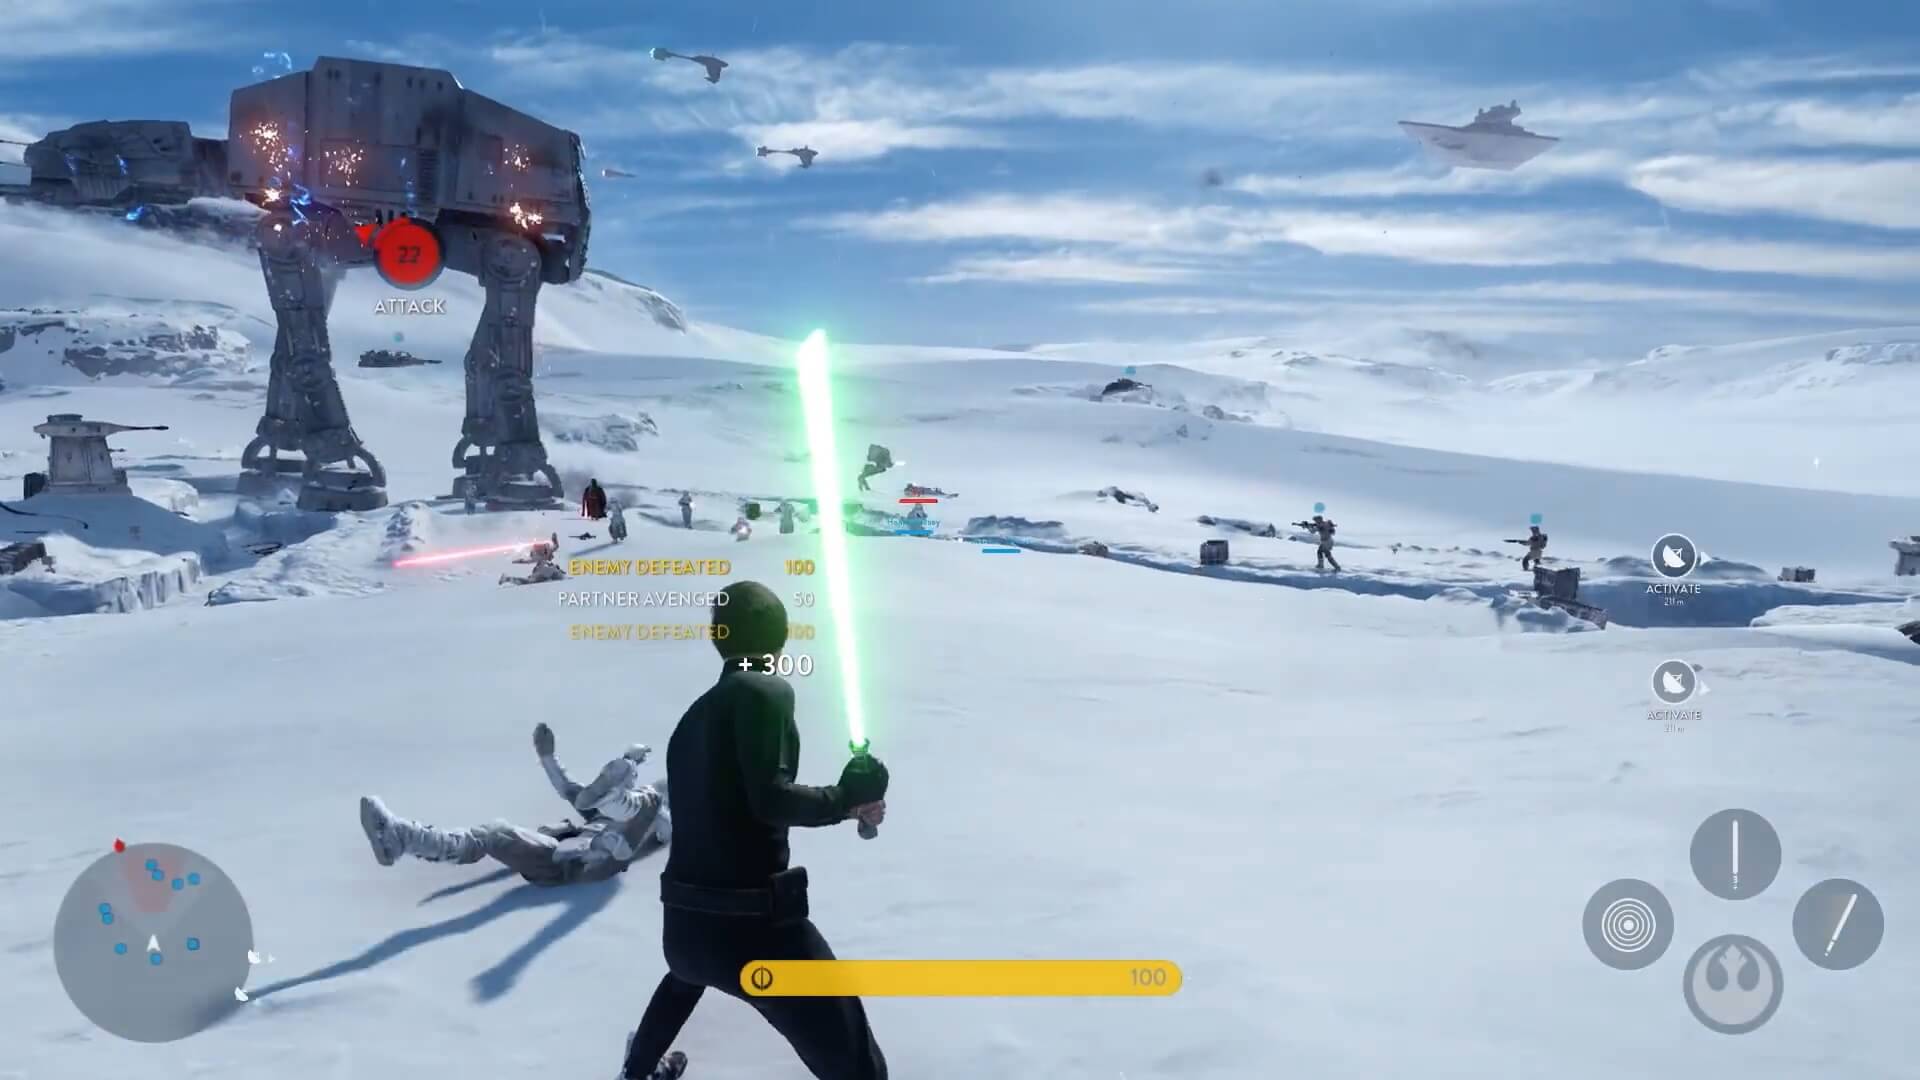 E3-2015-Darth-Vader-and-Luke-duel-in-Star-Wars-Battlefront-Multiplayer-Gameplay-footage (1)